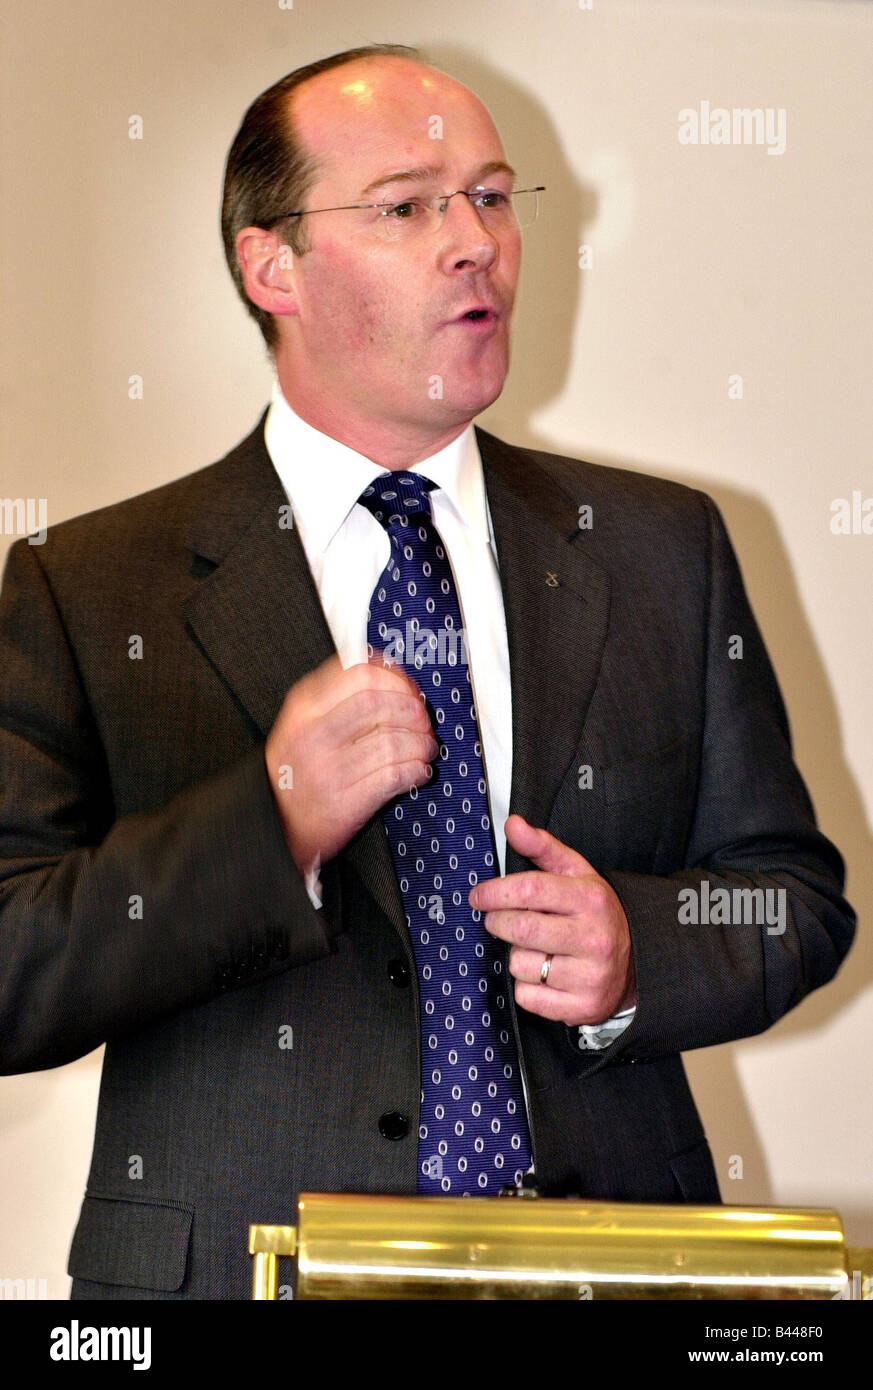 SNP leader John Swinney speaking at a press conference in Glasgow August 2003 Stock Photo